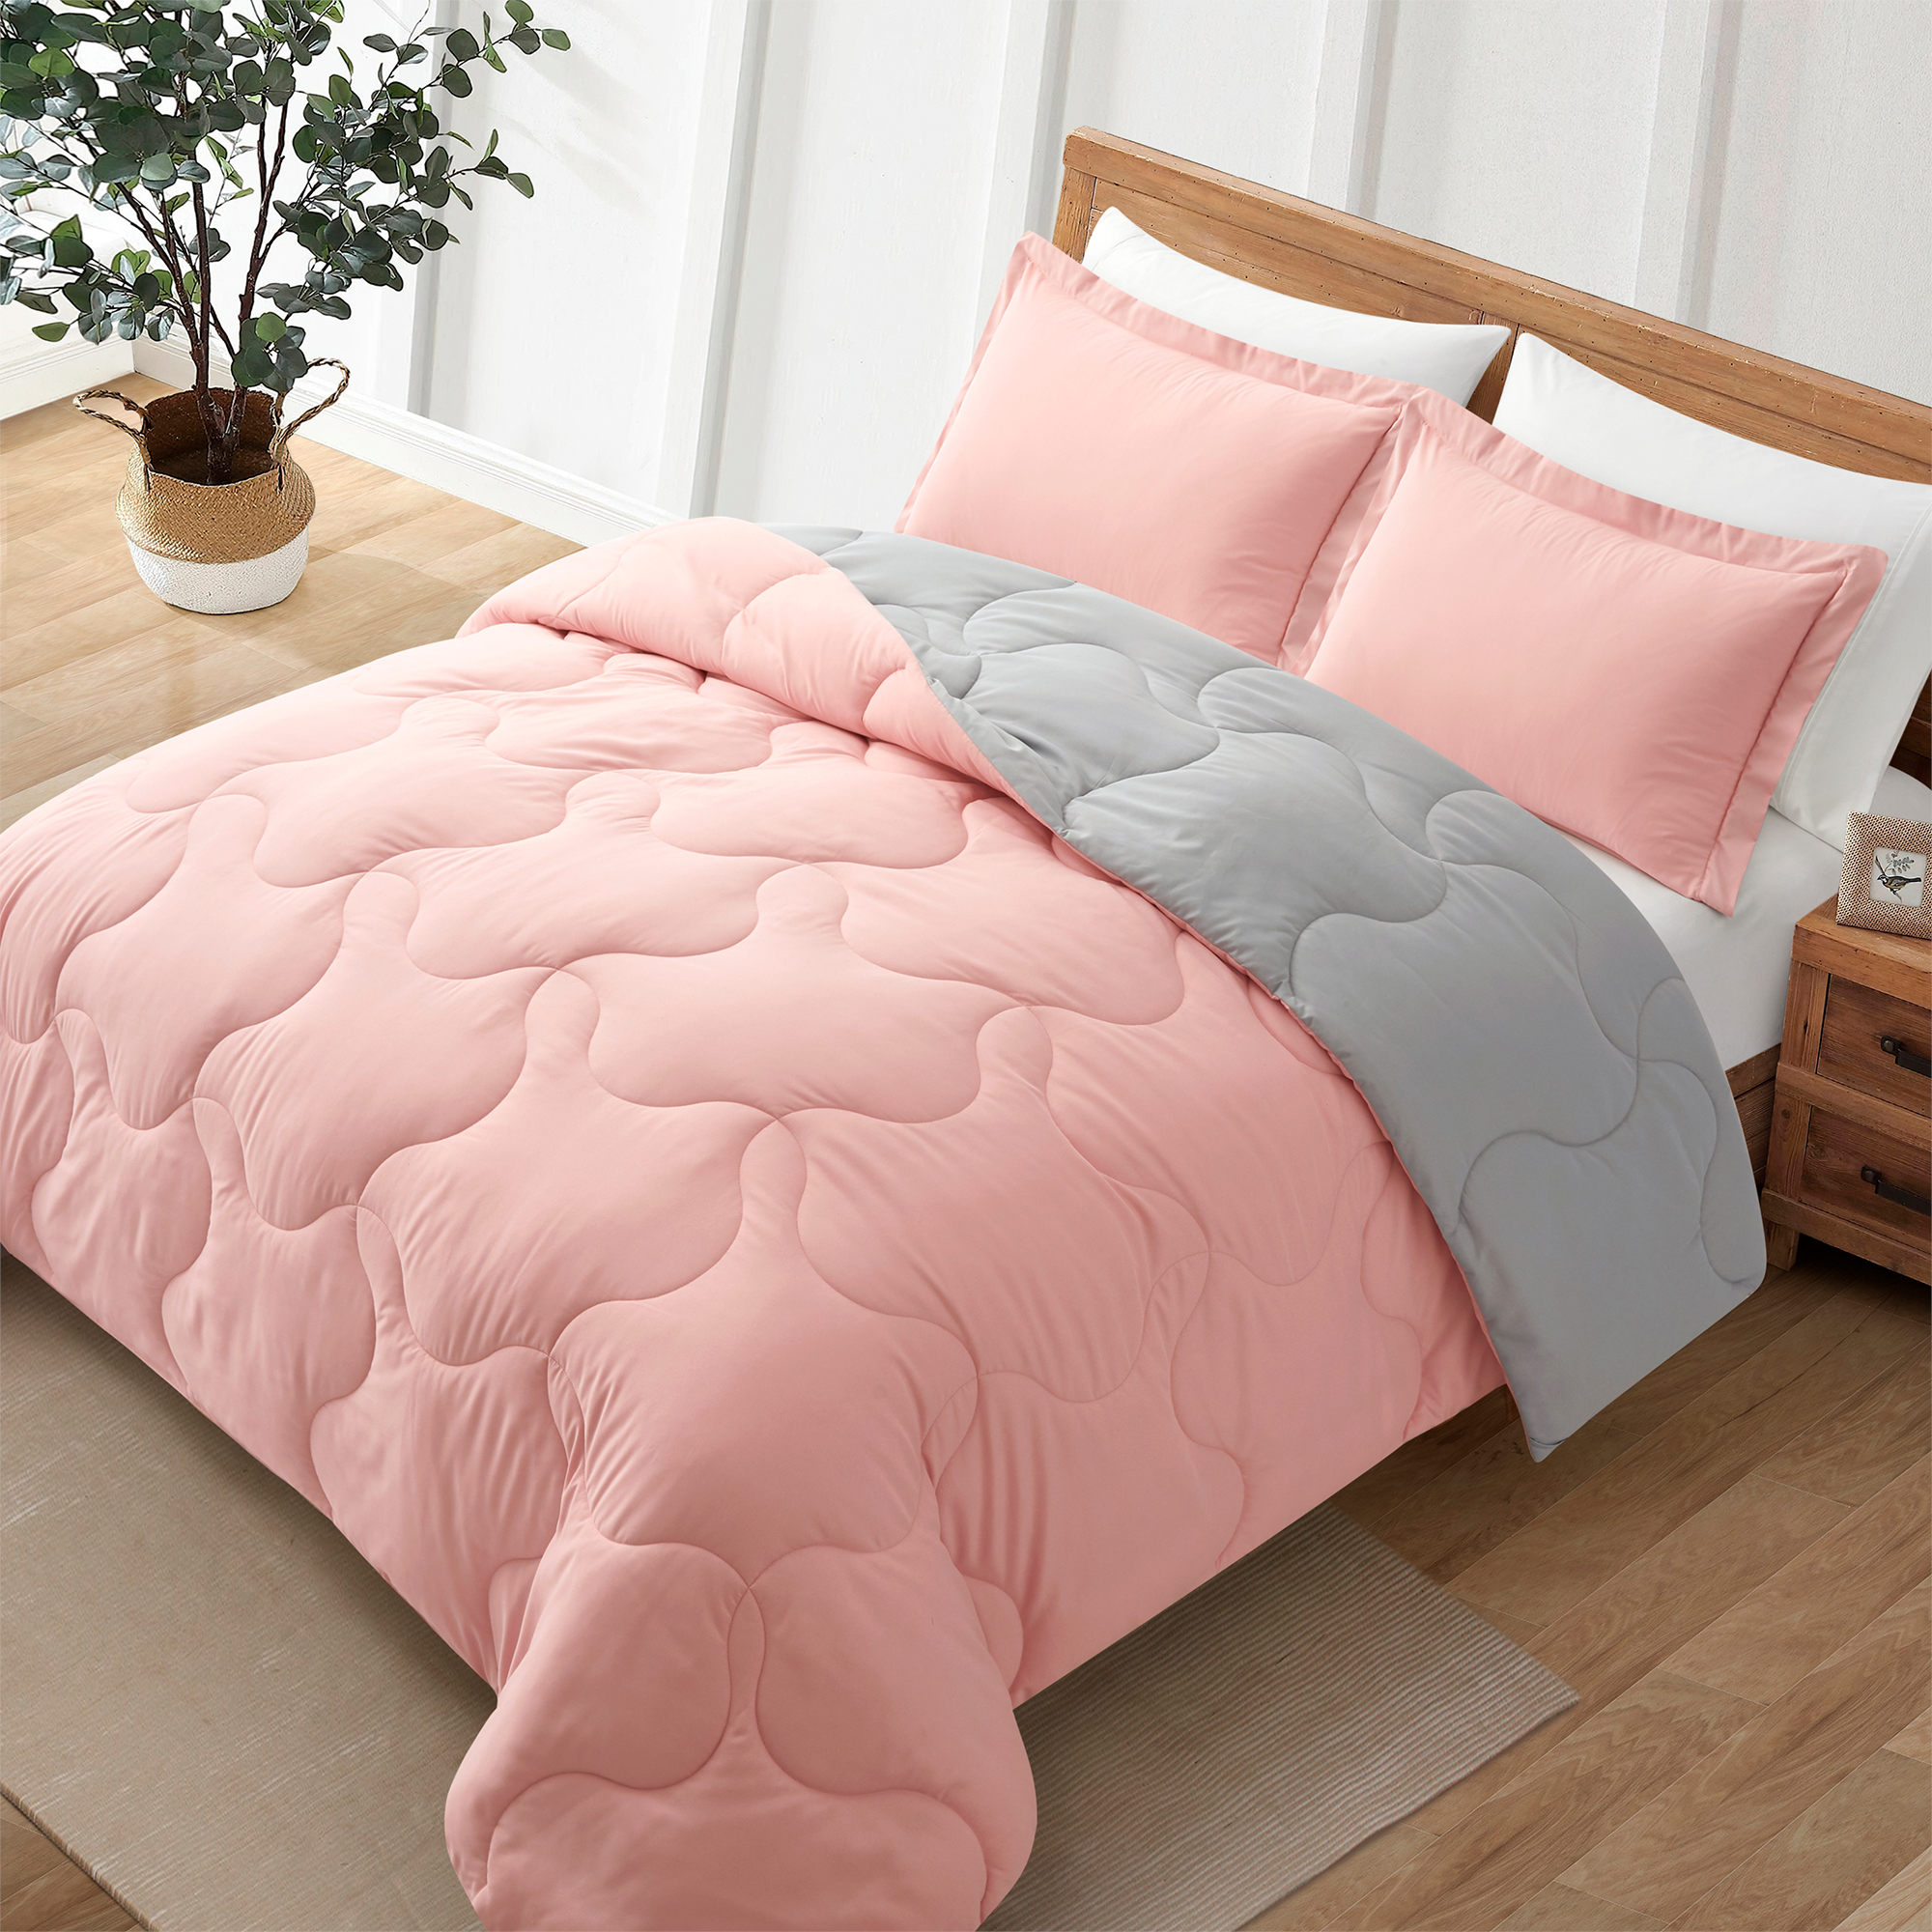 3 Or 2 Pieces Lightweight Reversible Comforter Set With Pillow Shams - Pink/Grey, King